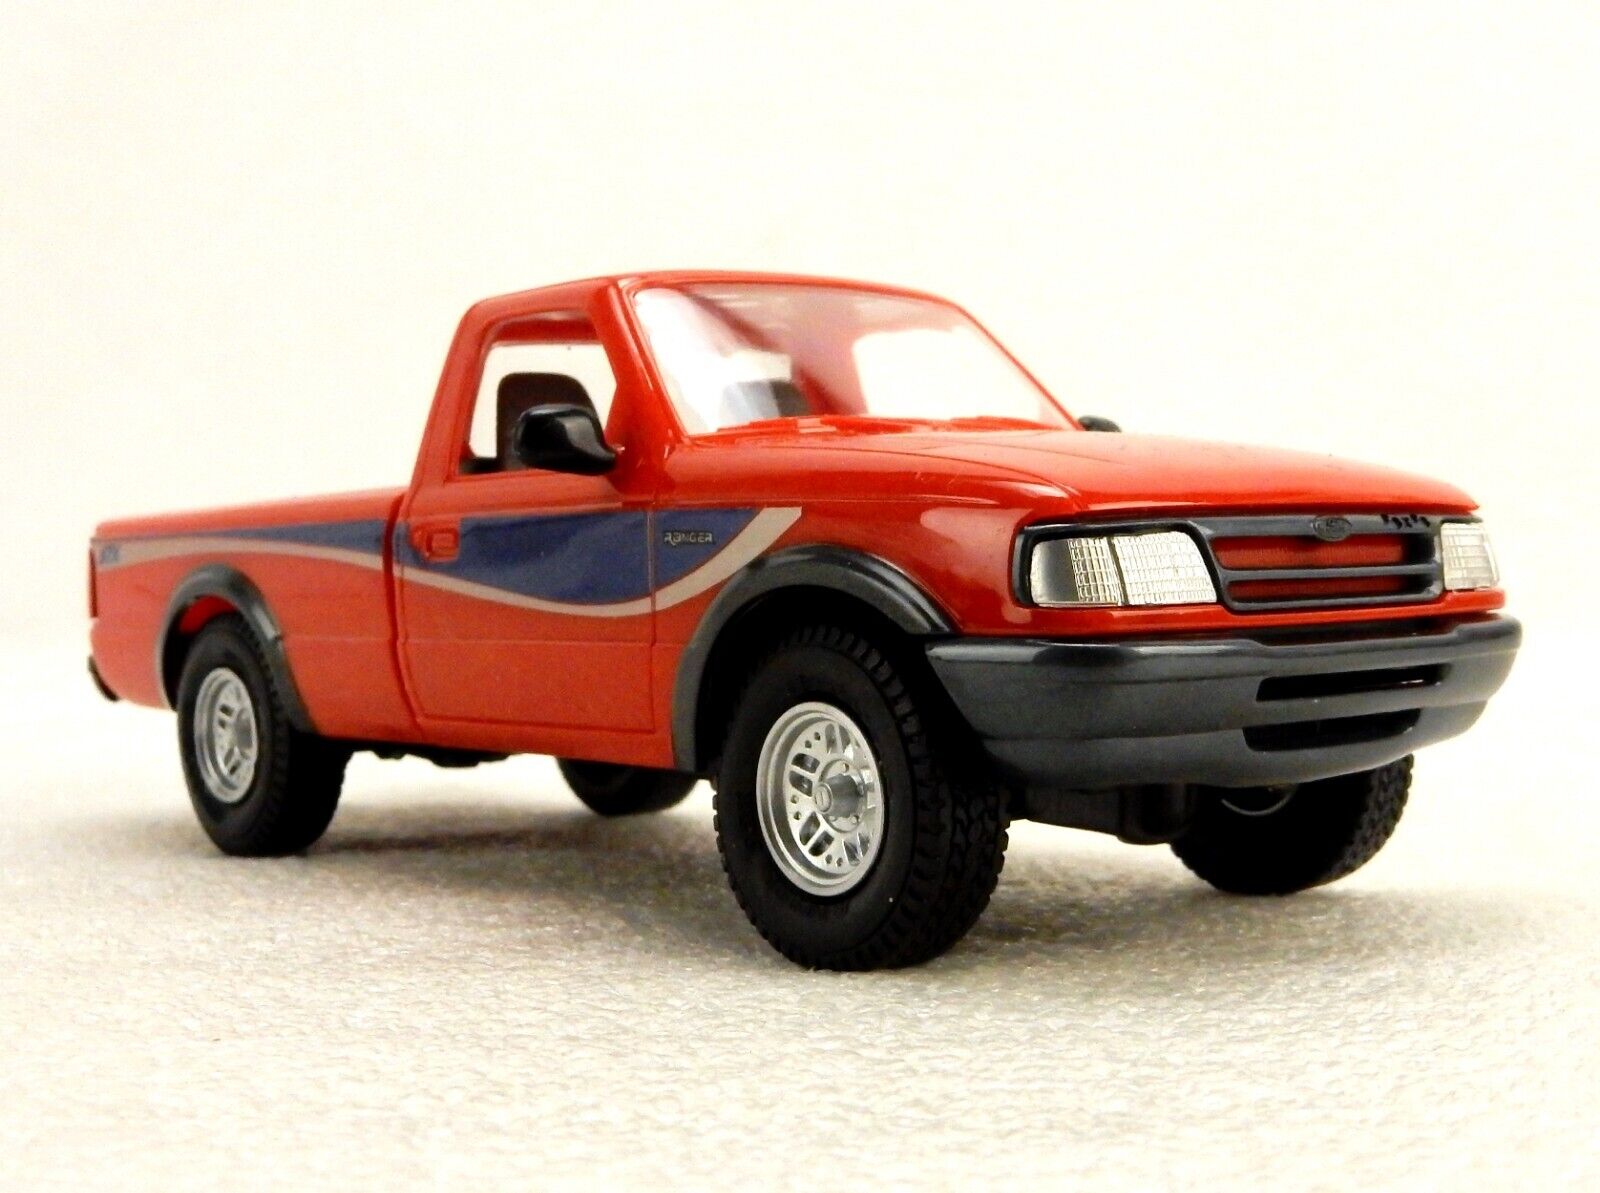 1993 Ford Ranger STX 4X4 Pickup, ERTL/AMT #6602, Performance Red, Collector